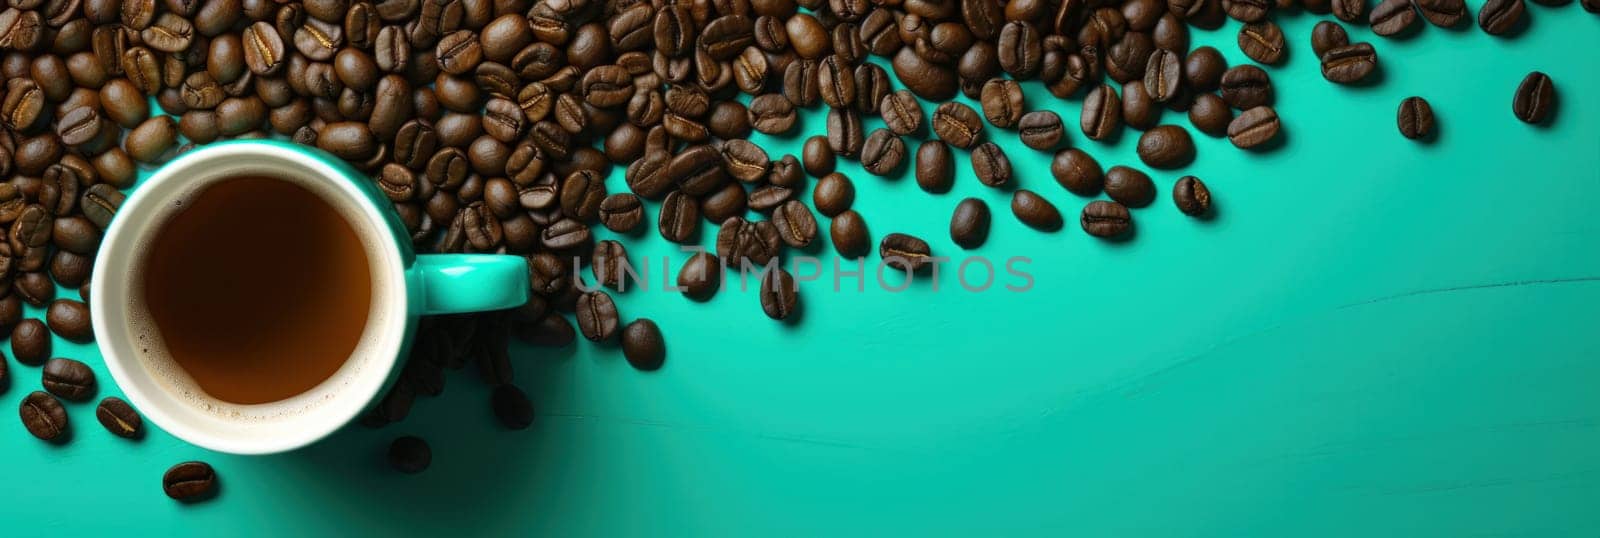 A cup of coffee surrounded by beans on a turquoise background